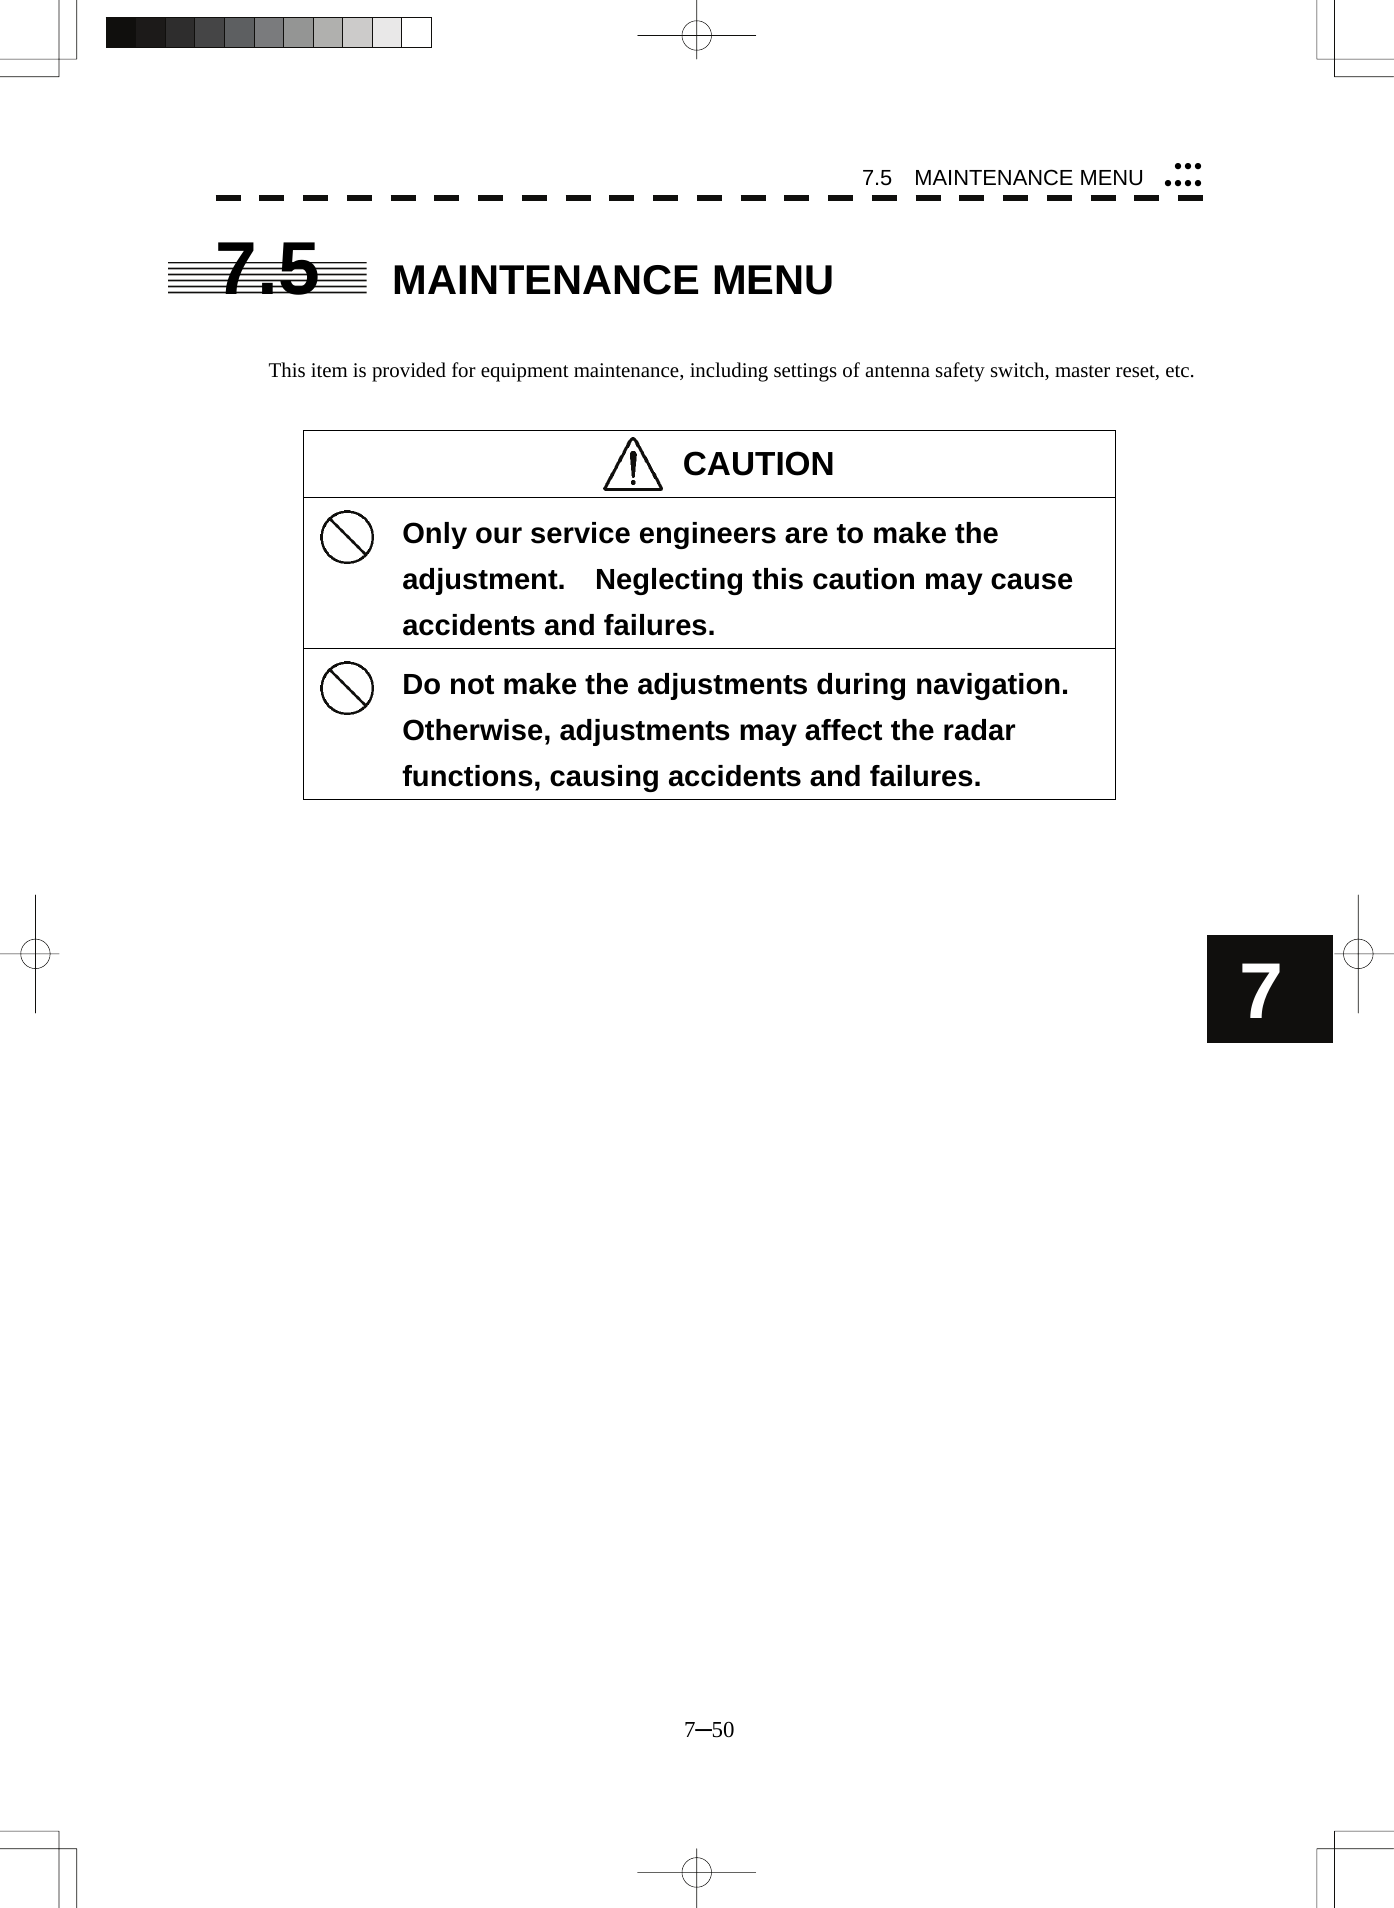 7.5  MAINTENANCE MENU 7─50 7yyyyyyy7.5 MAINTENANCE MENU   This item is provided for equipment maintenance, including settings of antenna safety switch, master reset, etc.   CAUTION   Only our service engineers are to make the adjustment.    Neglecting this caution may cause accidents and failures.   Do not make the adjustments during navigation.   Otherwise, adjustments may affect the radar functions, causing accidents and failures.    